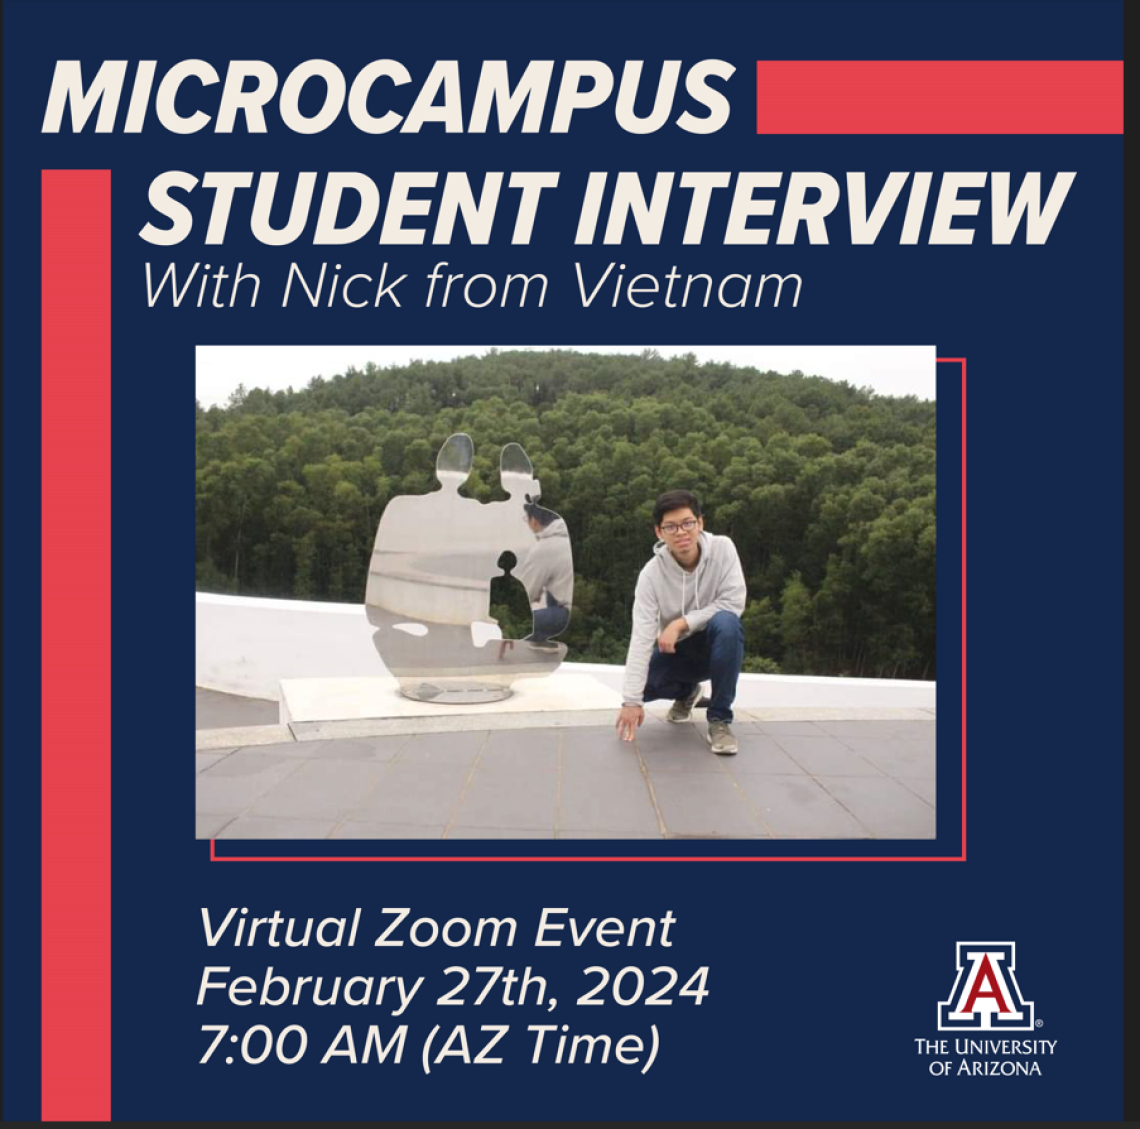 Microcampus student interview